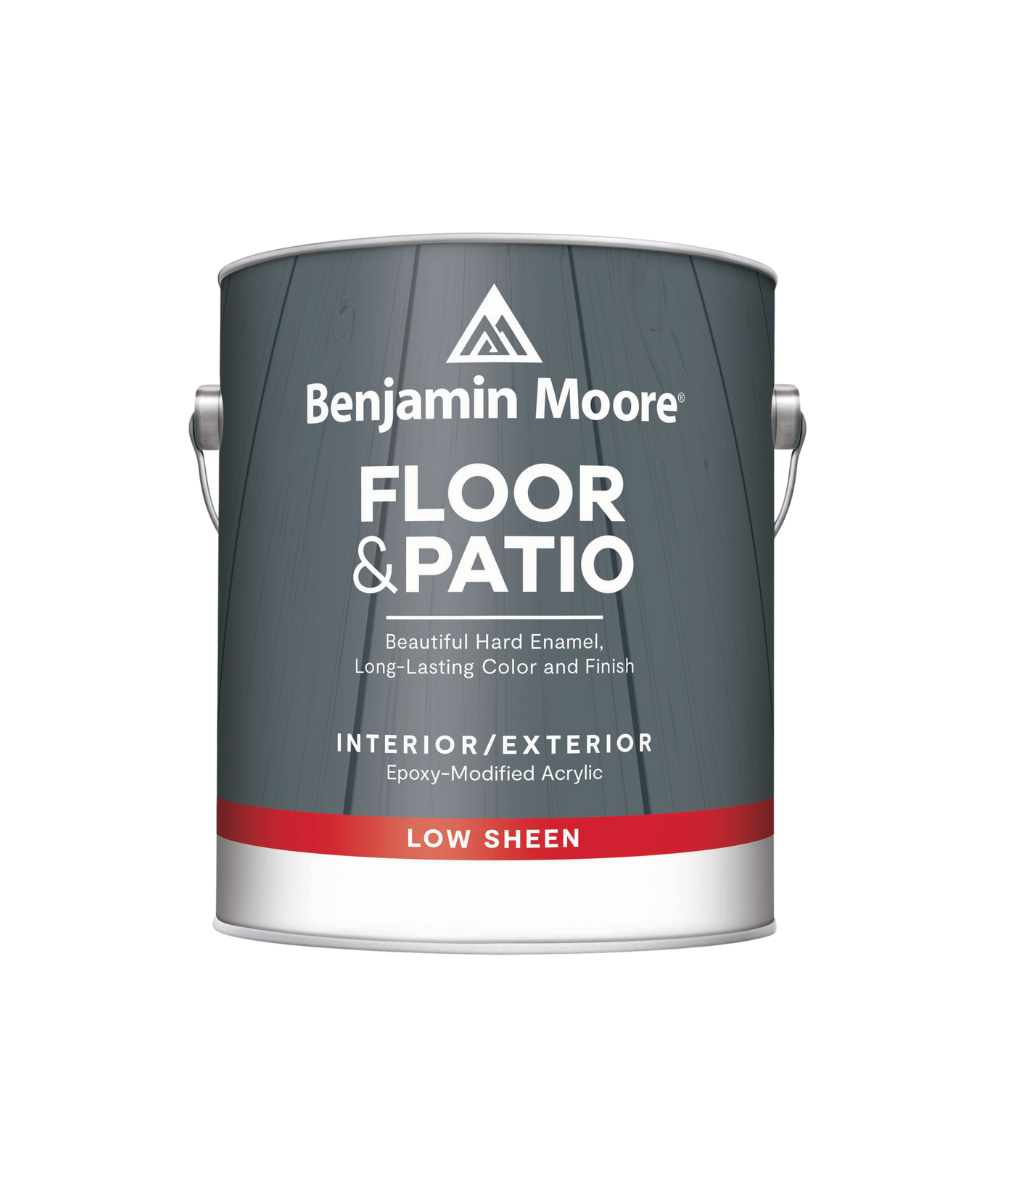 Benjamin Moore floor and patio low sheen Interior Paint available at Creative Paint in San Francisco, South Bay & East Bay.